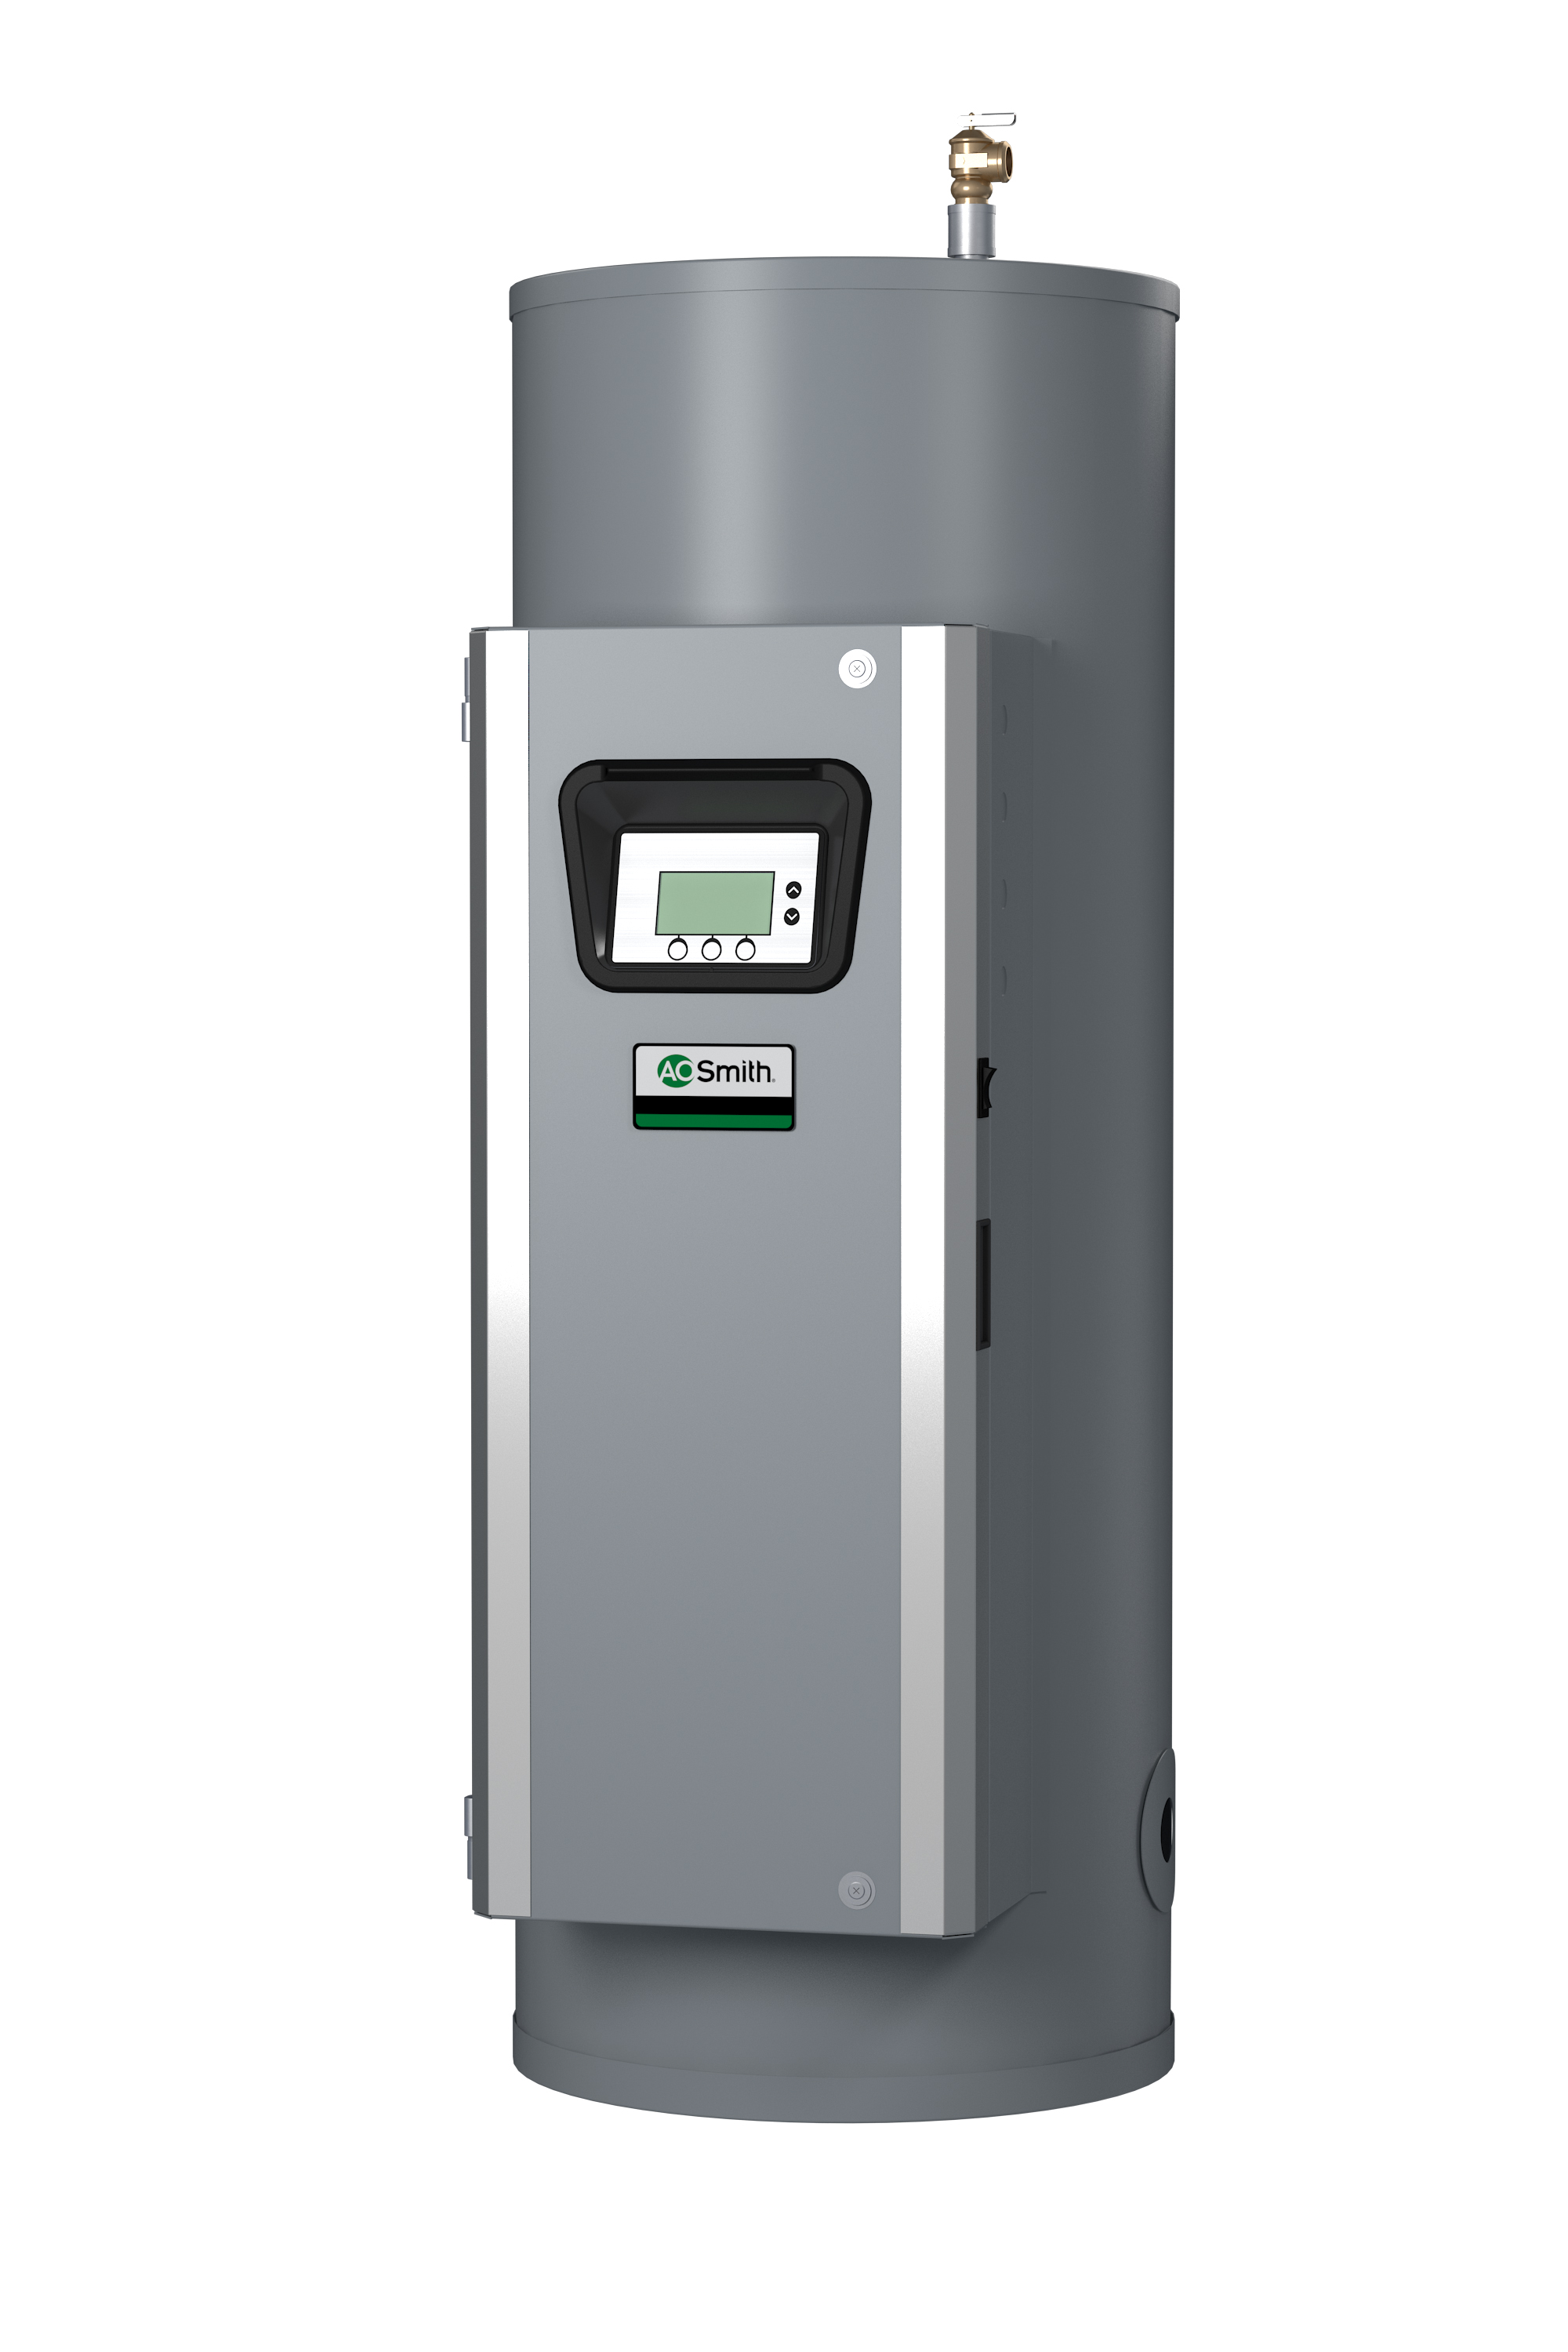 AO SMITH DSE-20A-6: 20 GALLONS, 6.0 KW, 208 VOLT, 28.84 AMPS, 1 PHASE, 1 ELEMENT, ASME CUSTOM Xi SERIES HEAVY DUTY COMMERCIAL ELECTRIC WATER HEATER